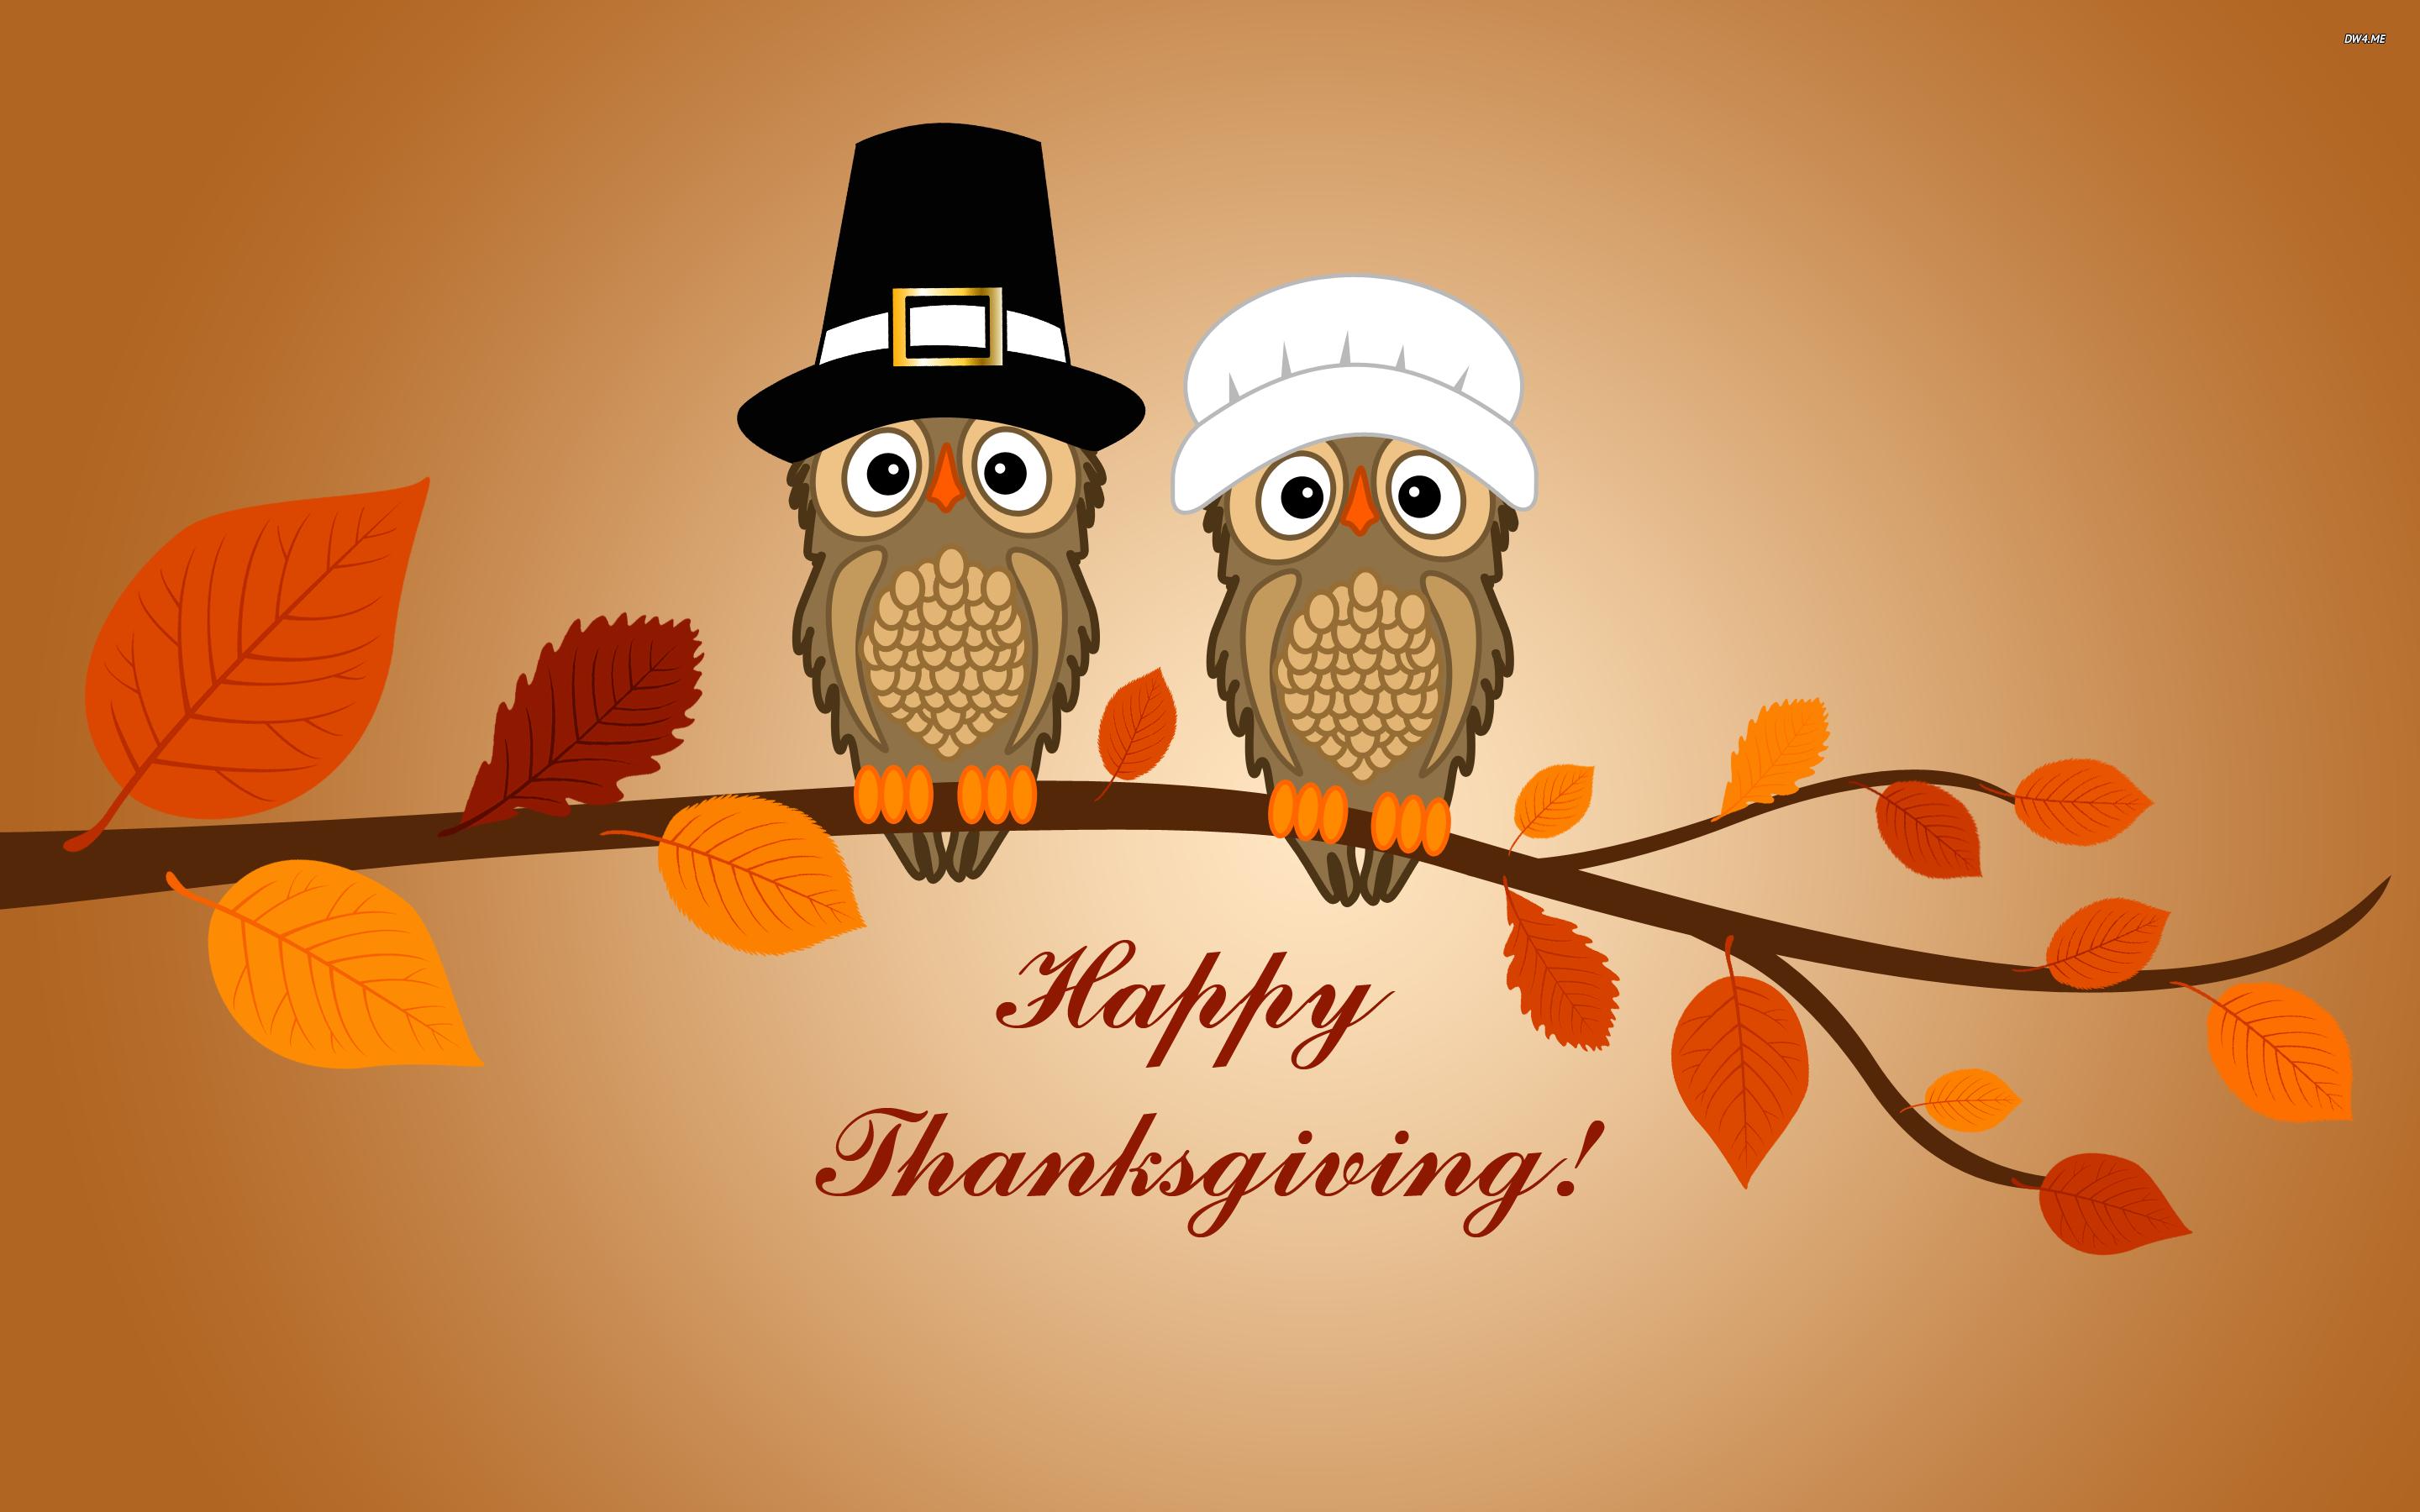 Image of funny thanksgiving wallpaper